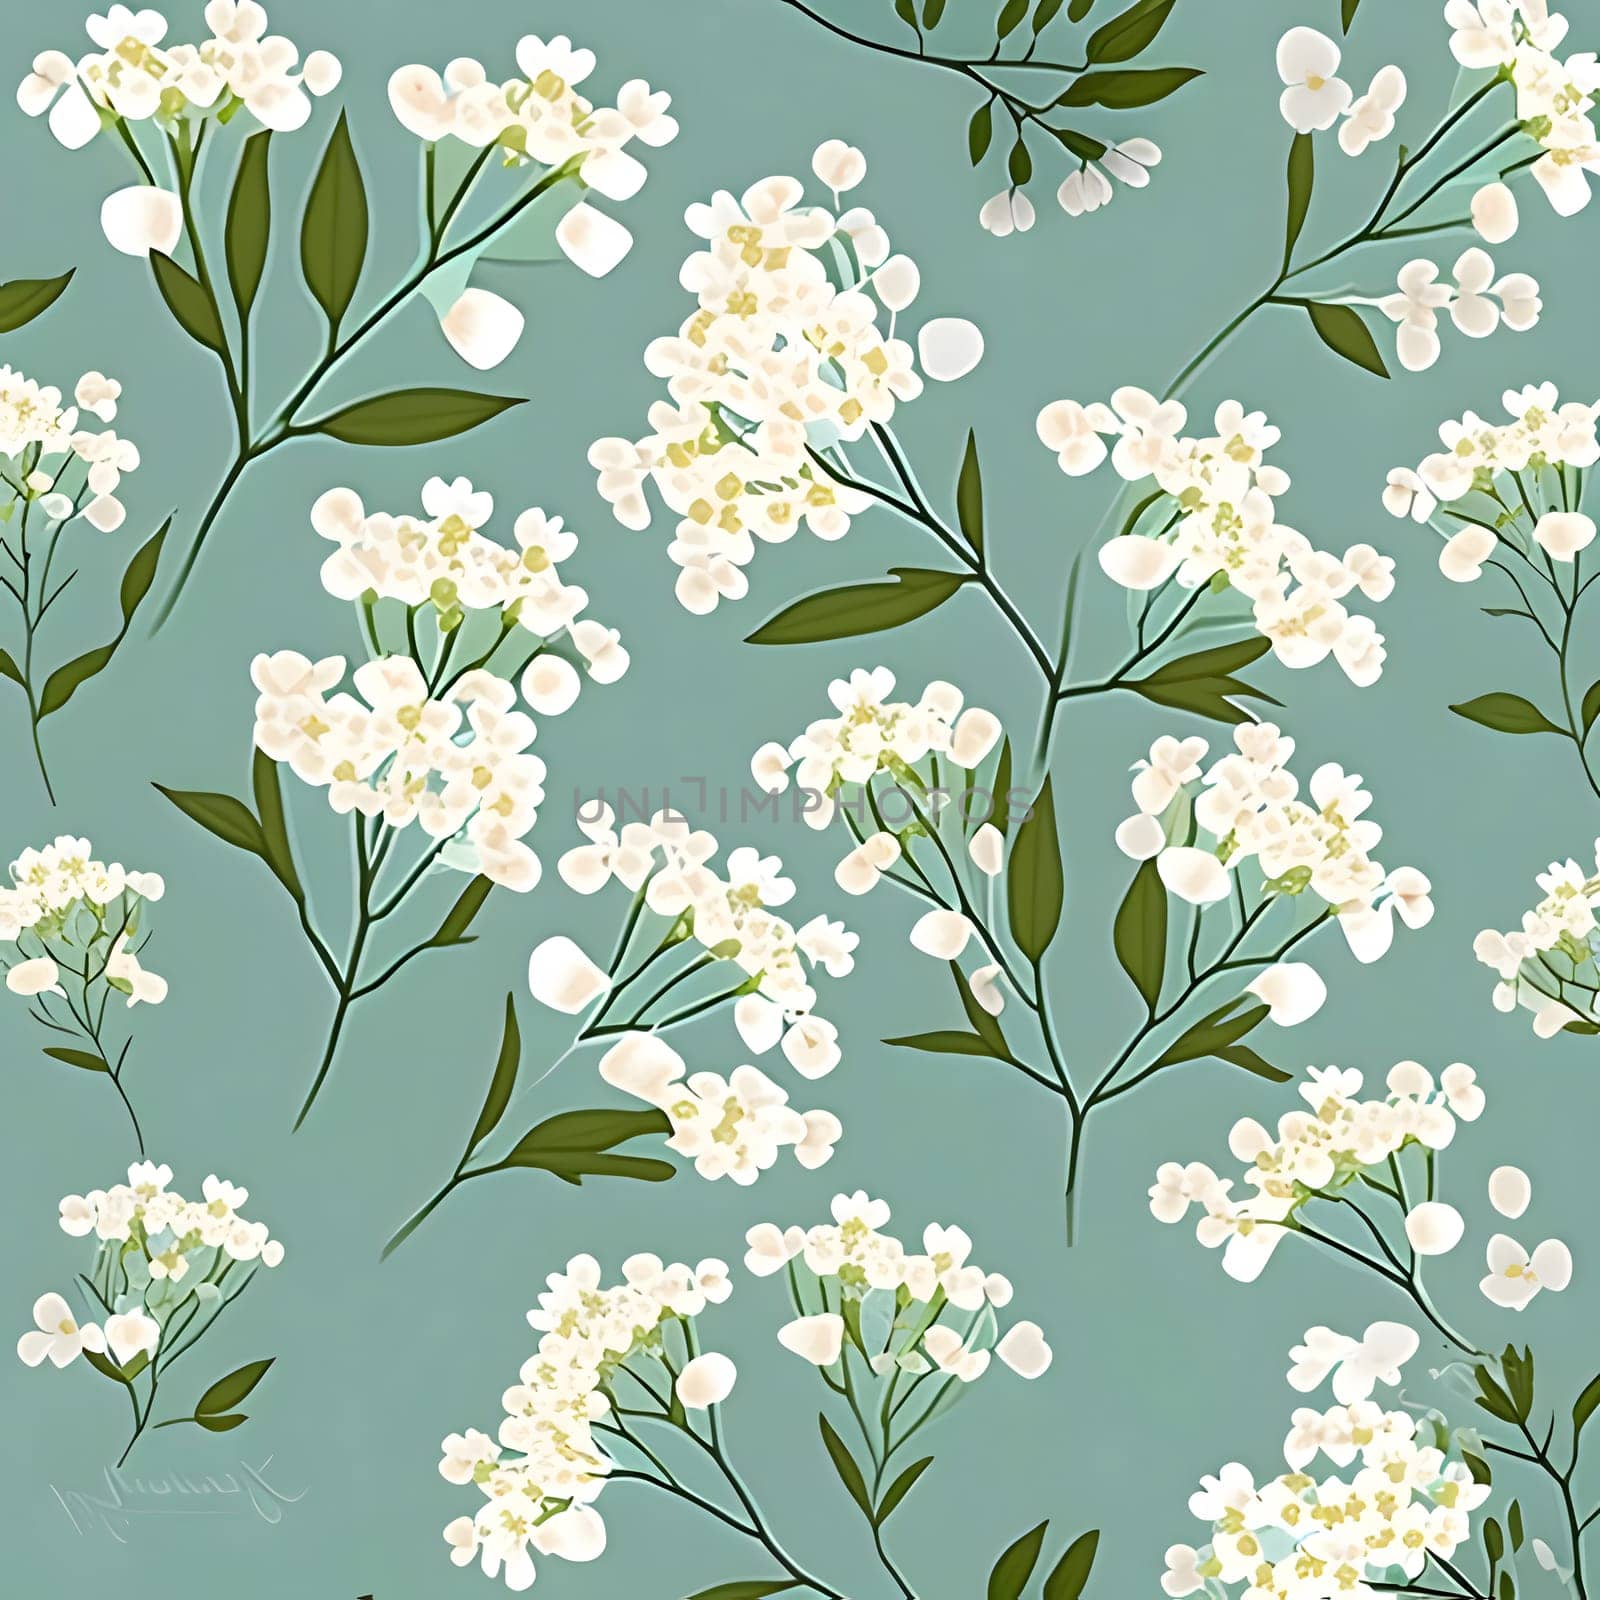 Patterns and banners backgrounds: Seamless pattern with white flowers on a turquoise background